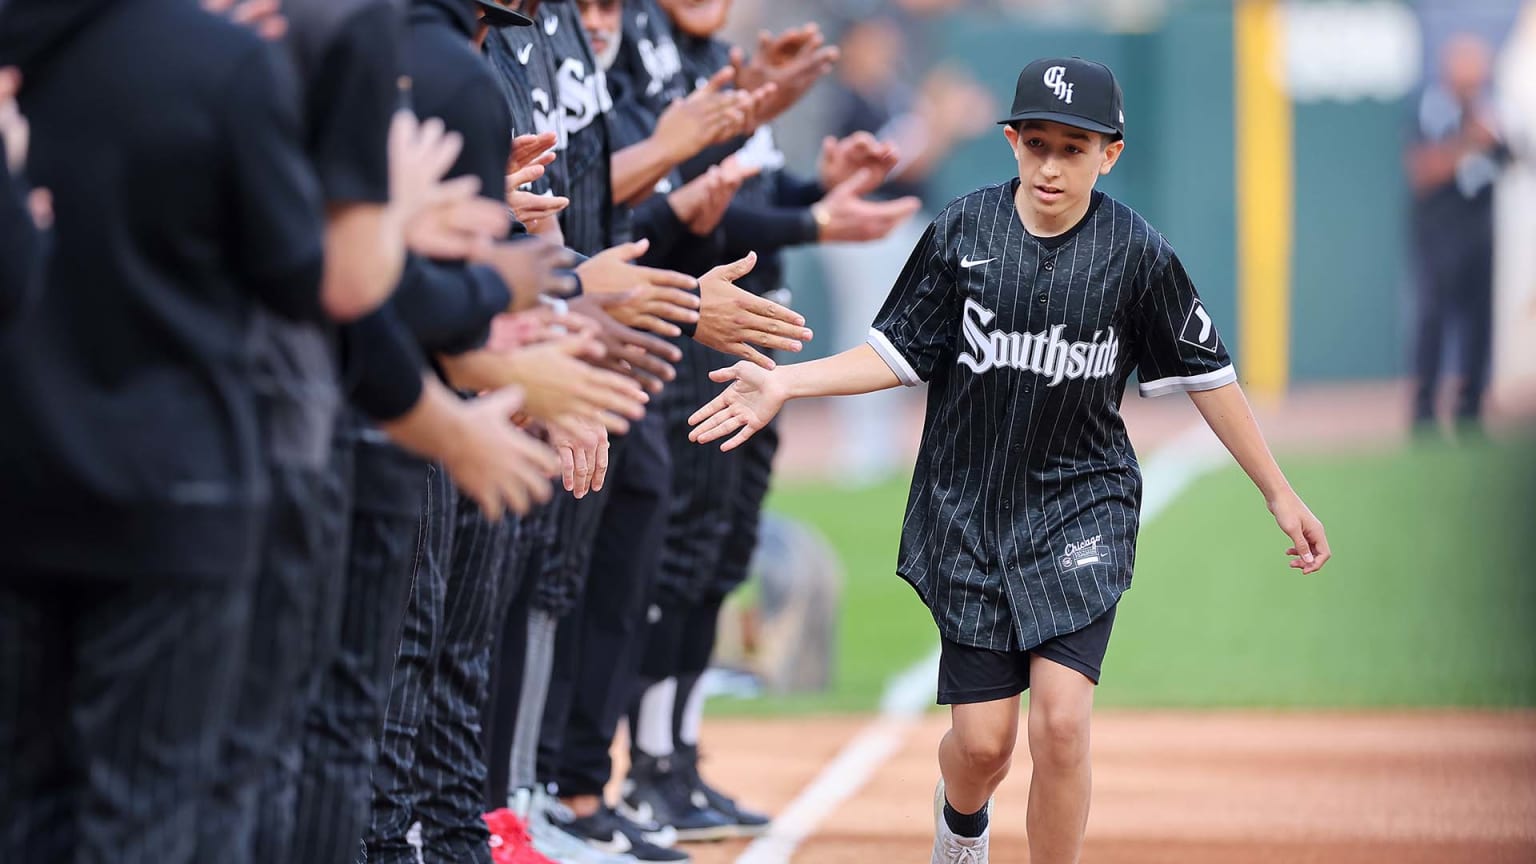 14-year-old fan Brady Nelson slaps hands with White Sox players